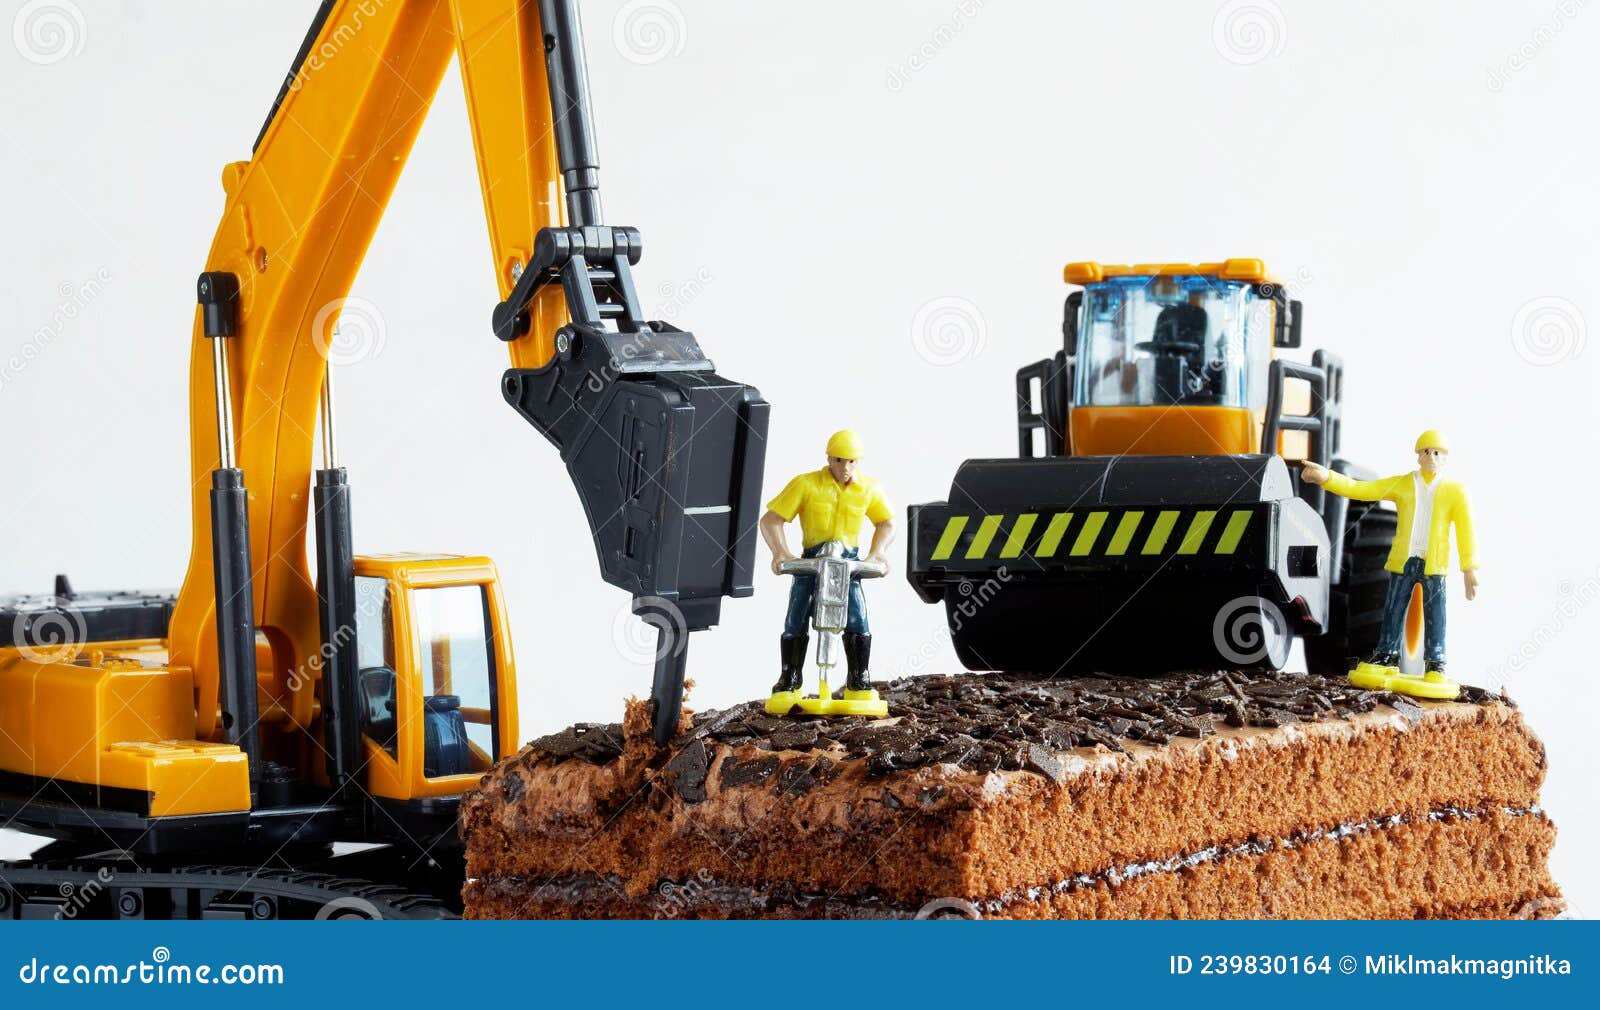 https://thumbs.dreamstime.com/z/toy-construction-machinery-worker-jackhammer-work-chocolate-biscuit-cake-sprinkled-chocolate-chips-concept-239830164.jpg